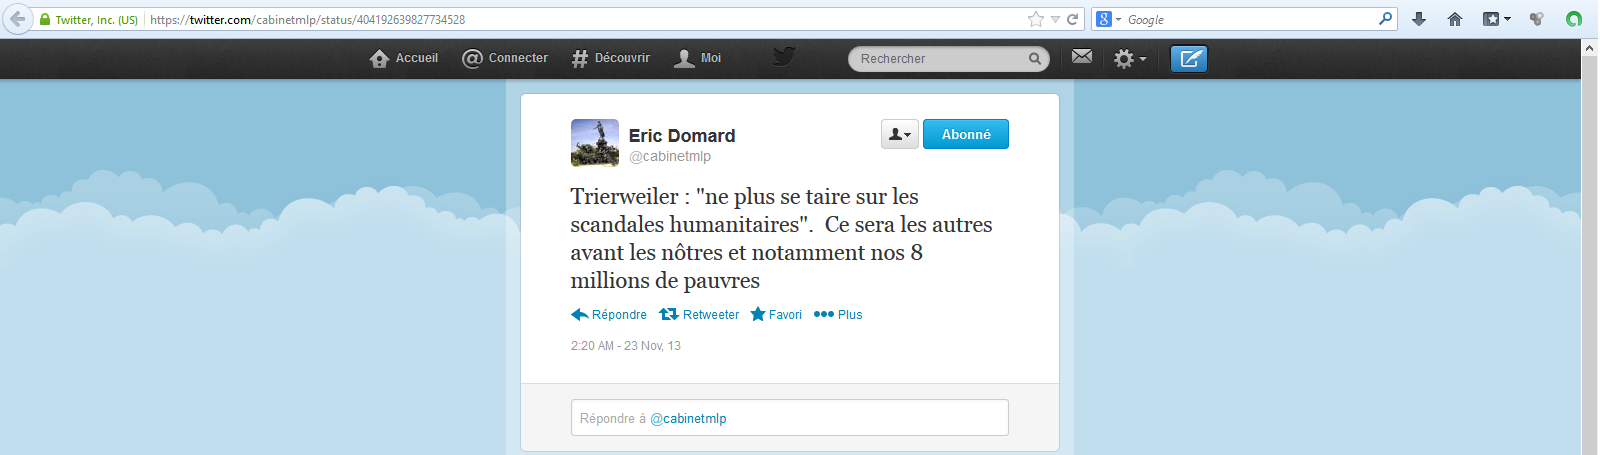 Eric-Domard-23-11-13-Scandales-humanitaires